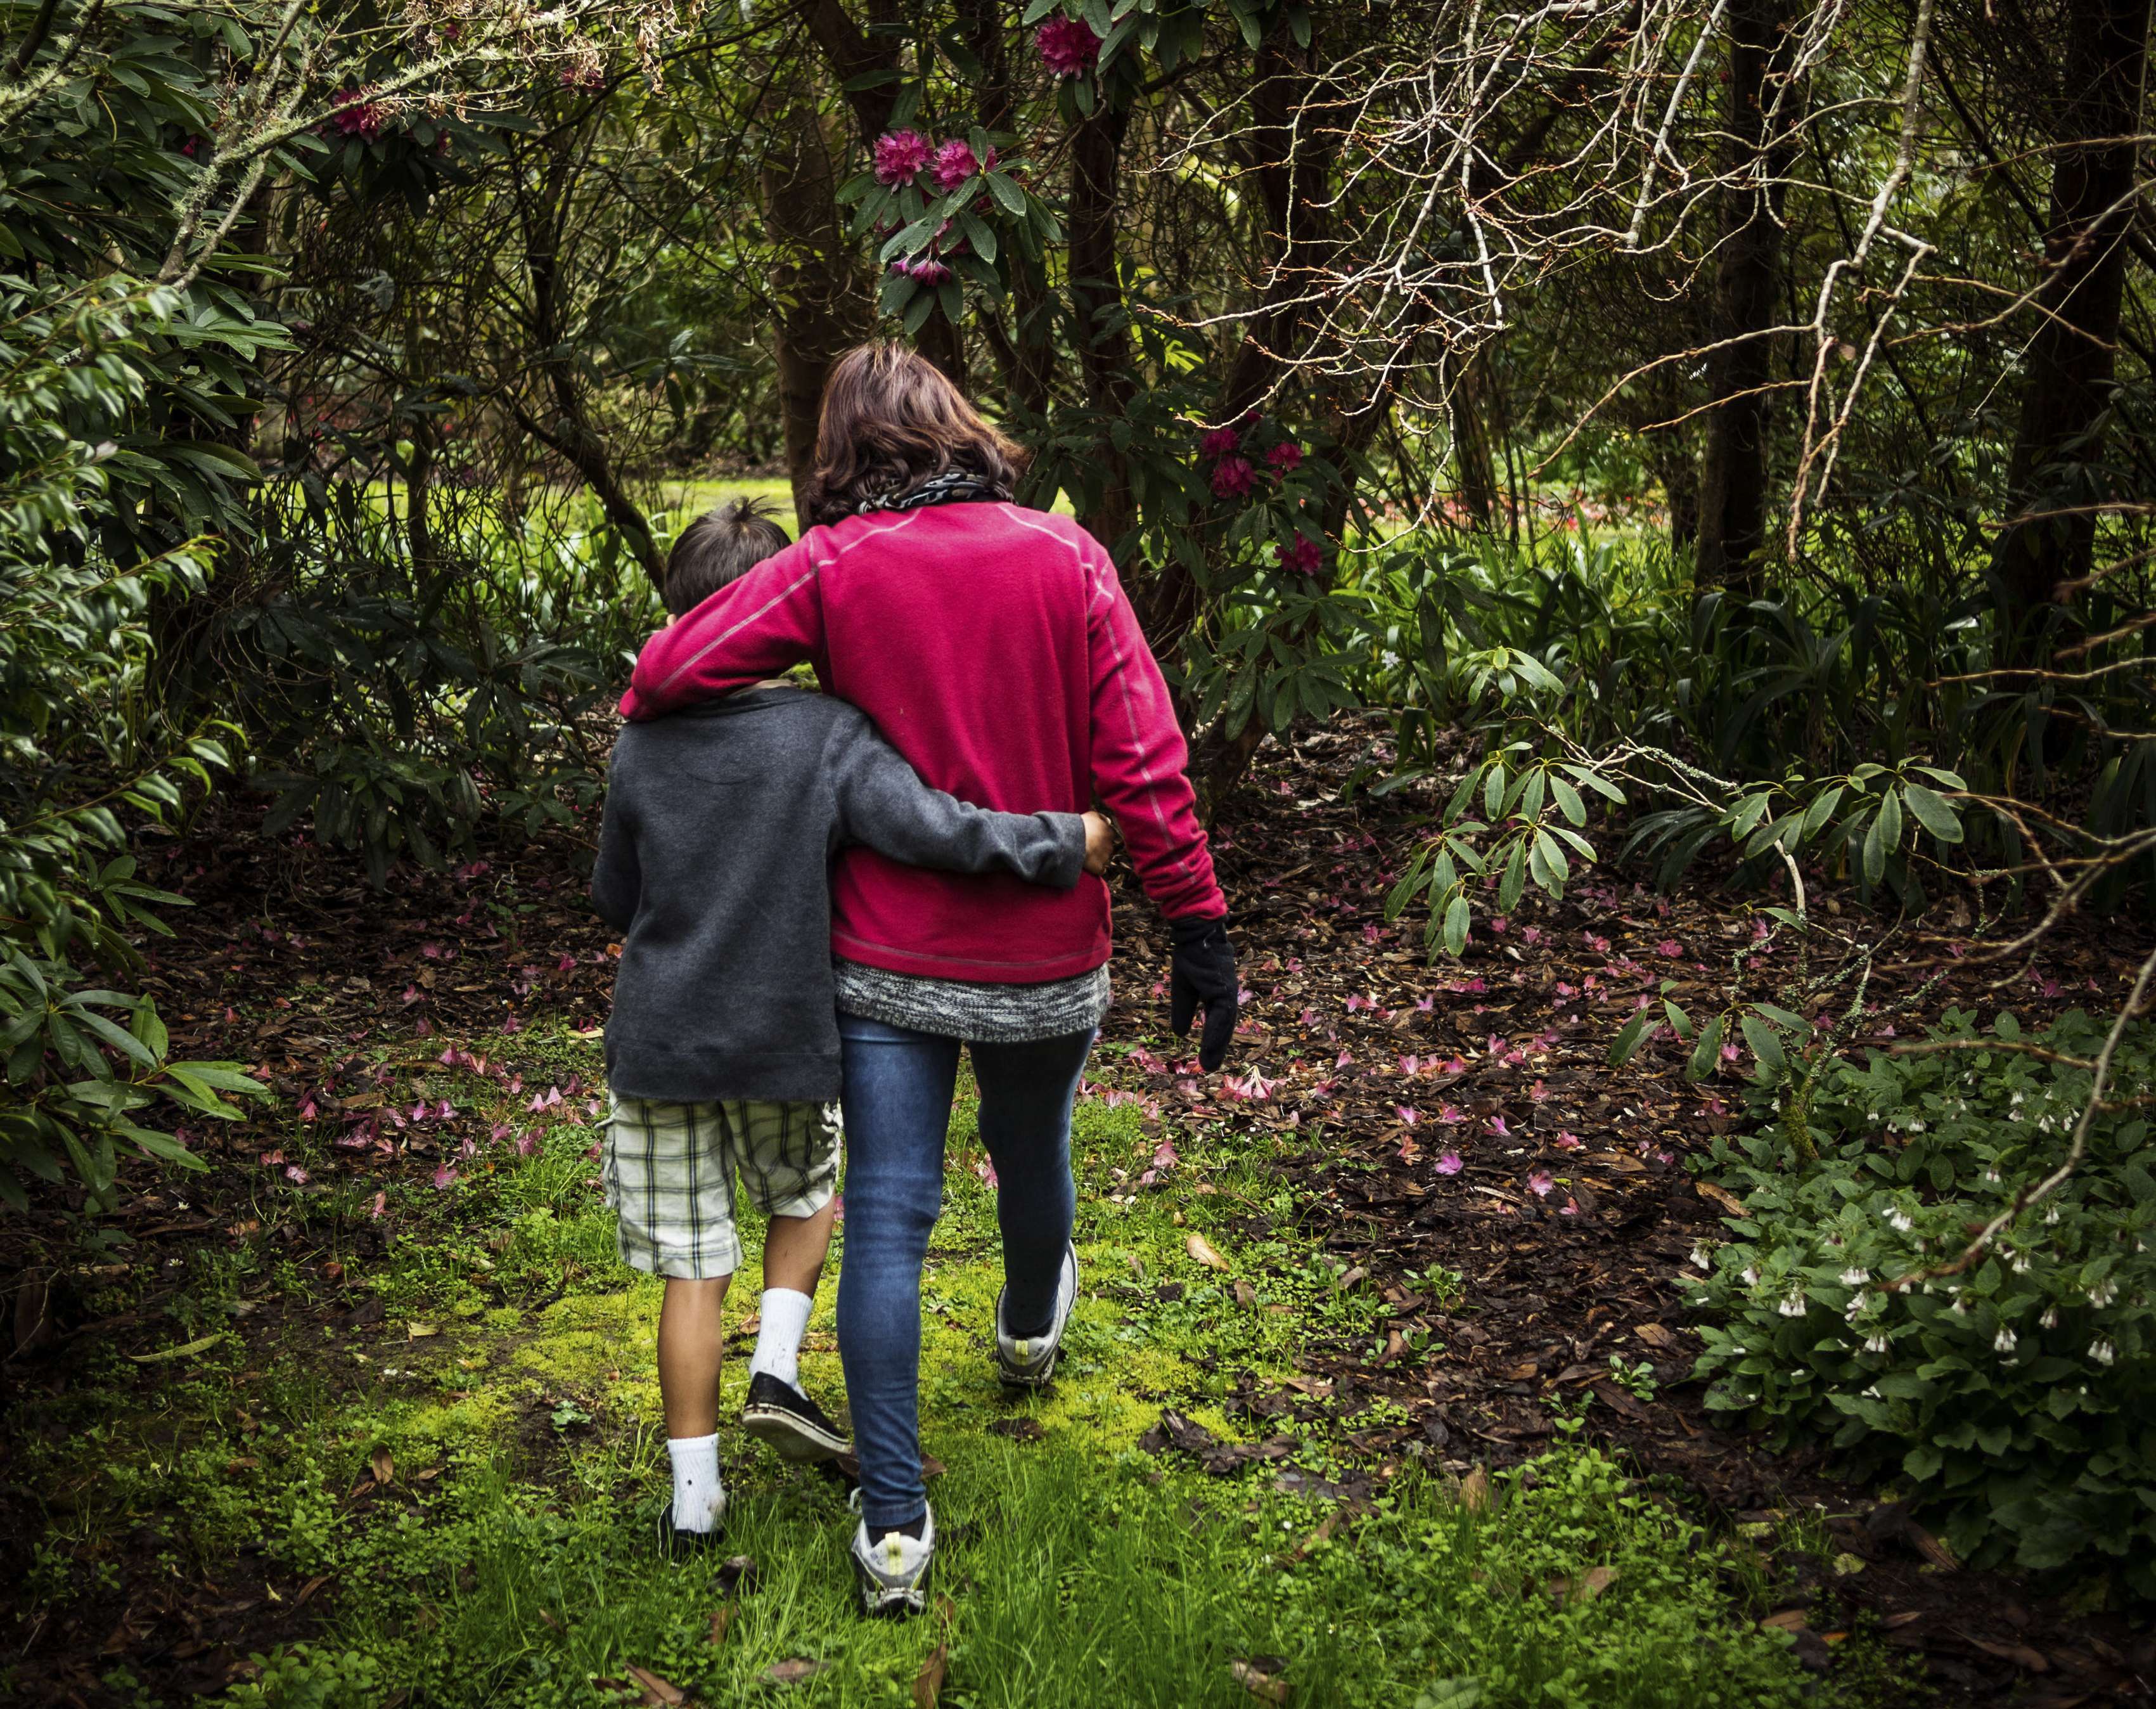 A mother and son bonding. Photo: UrbanZone/Alamy Stock